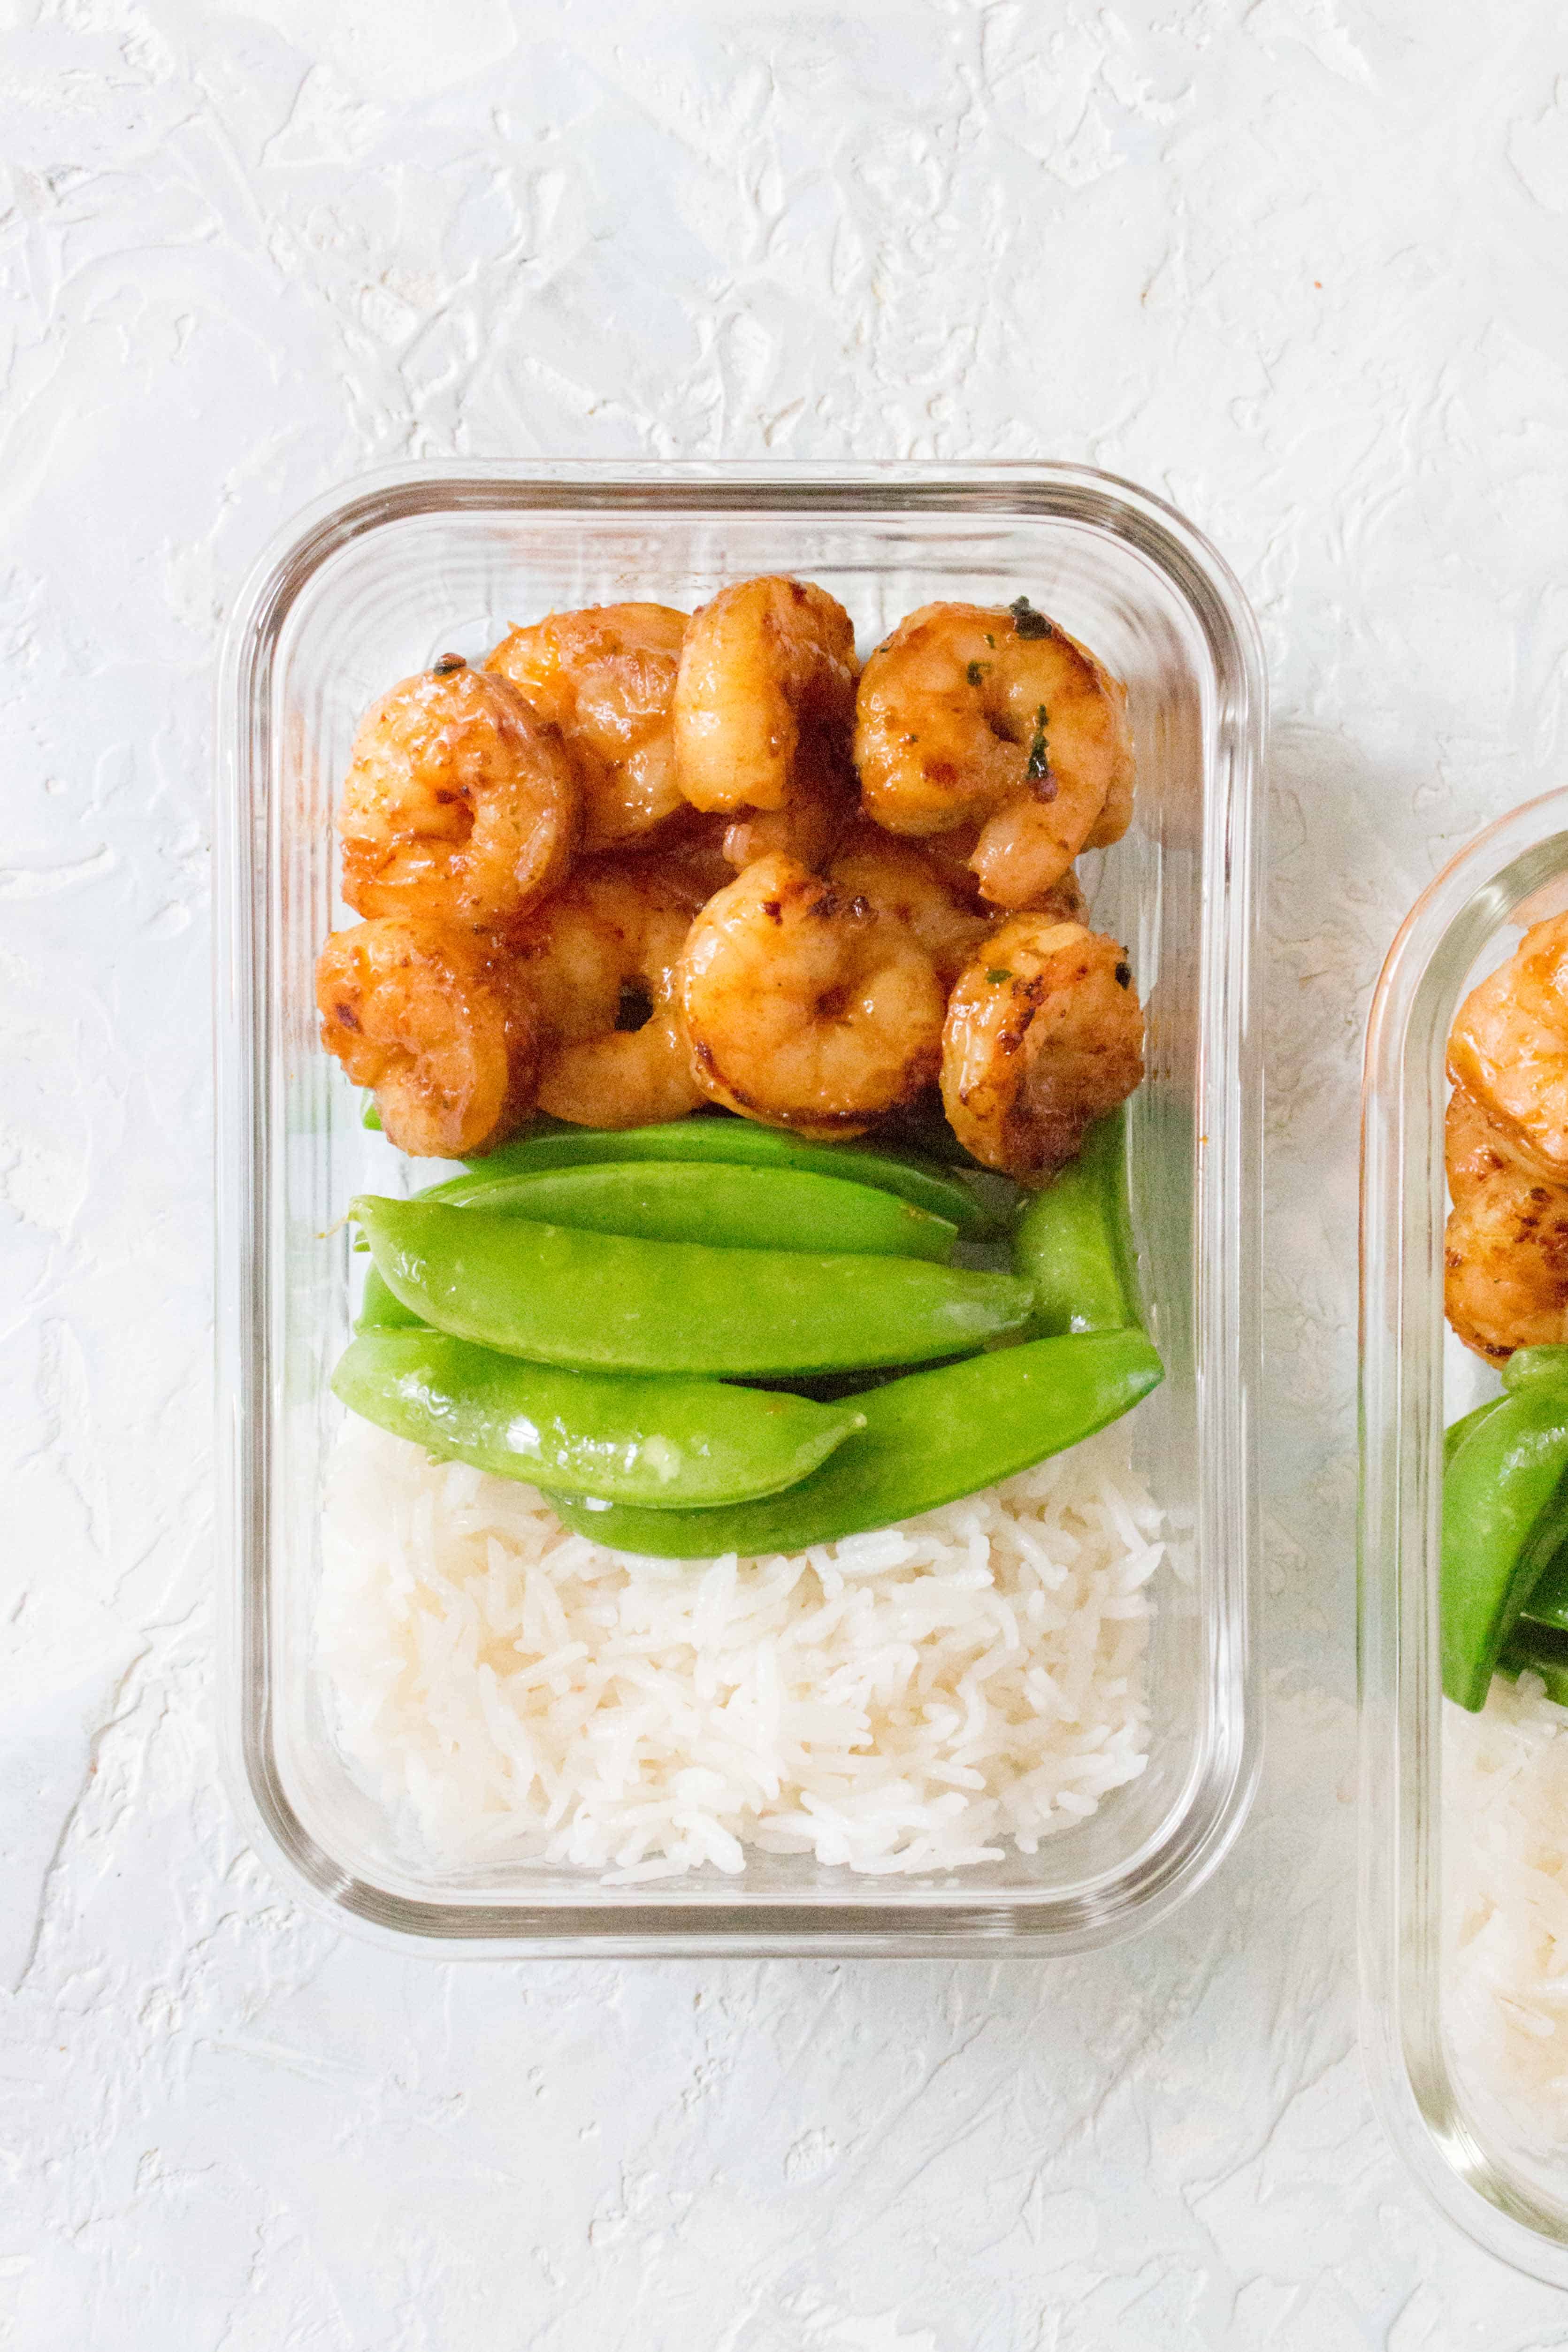 This Honey Garlic Lime Shrimp is perfectly pan seared, sweet and garlicky. Make this for your dinner or meal prep in under 20 minutes.